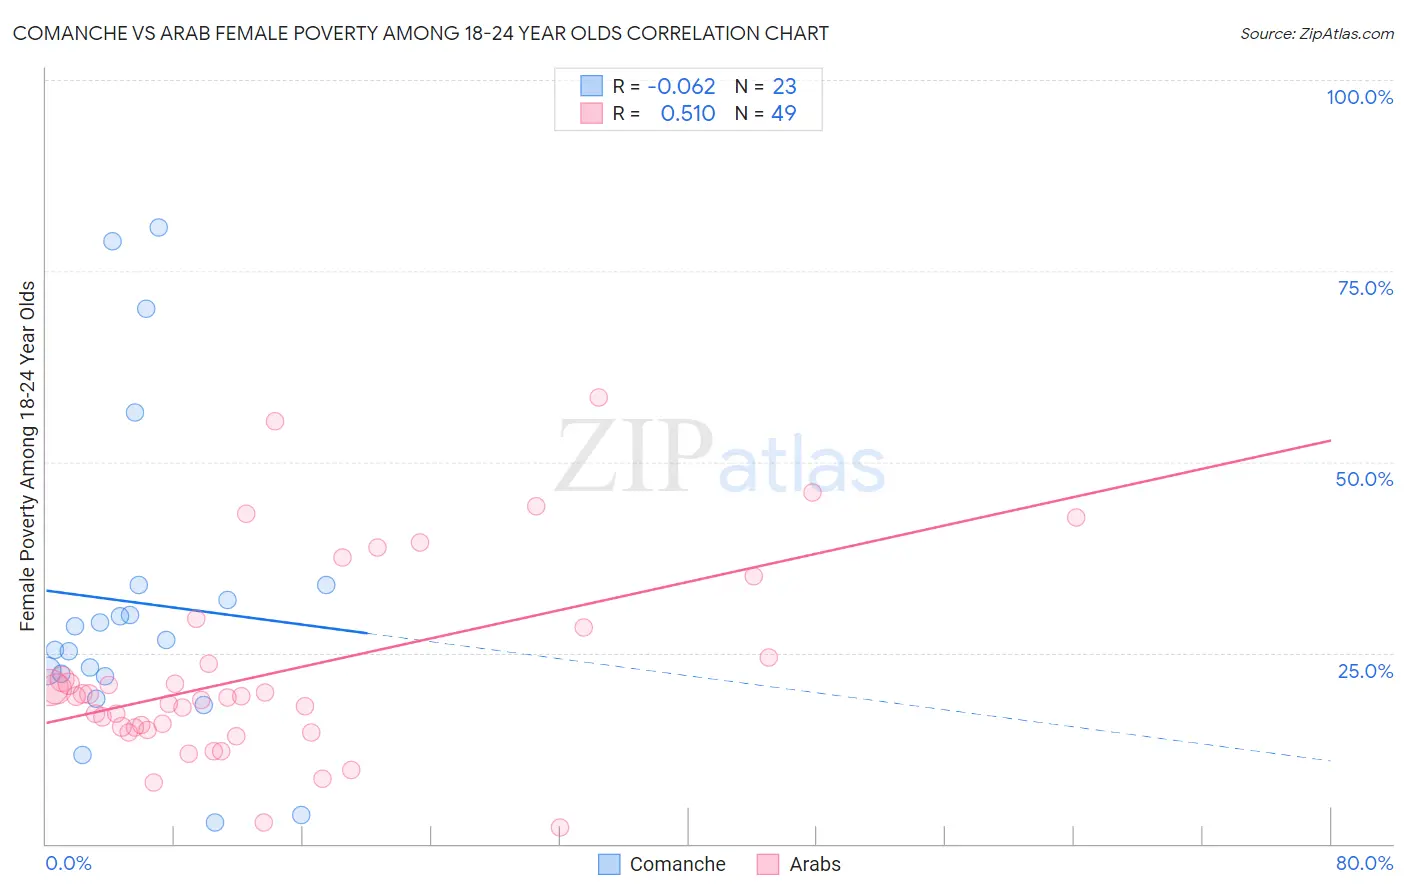 Comanche vs Arab Female Poverty Among 18-24 Year Olds